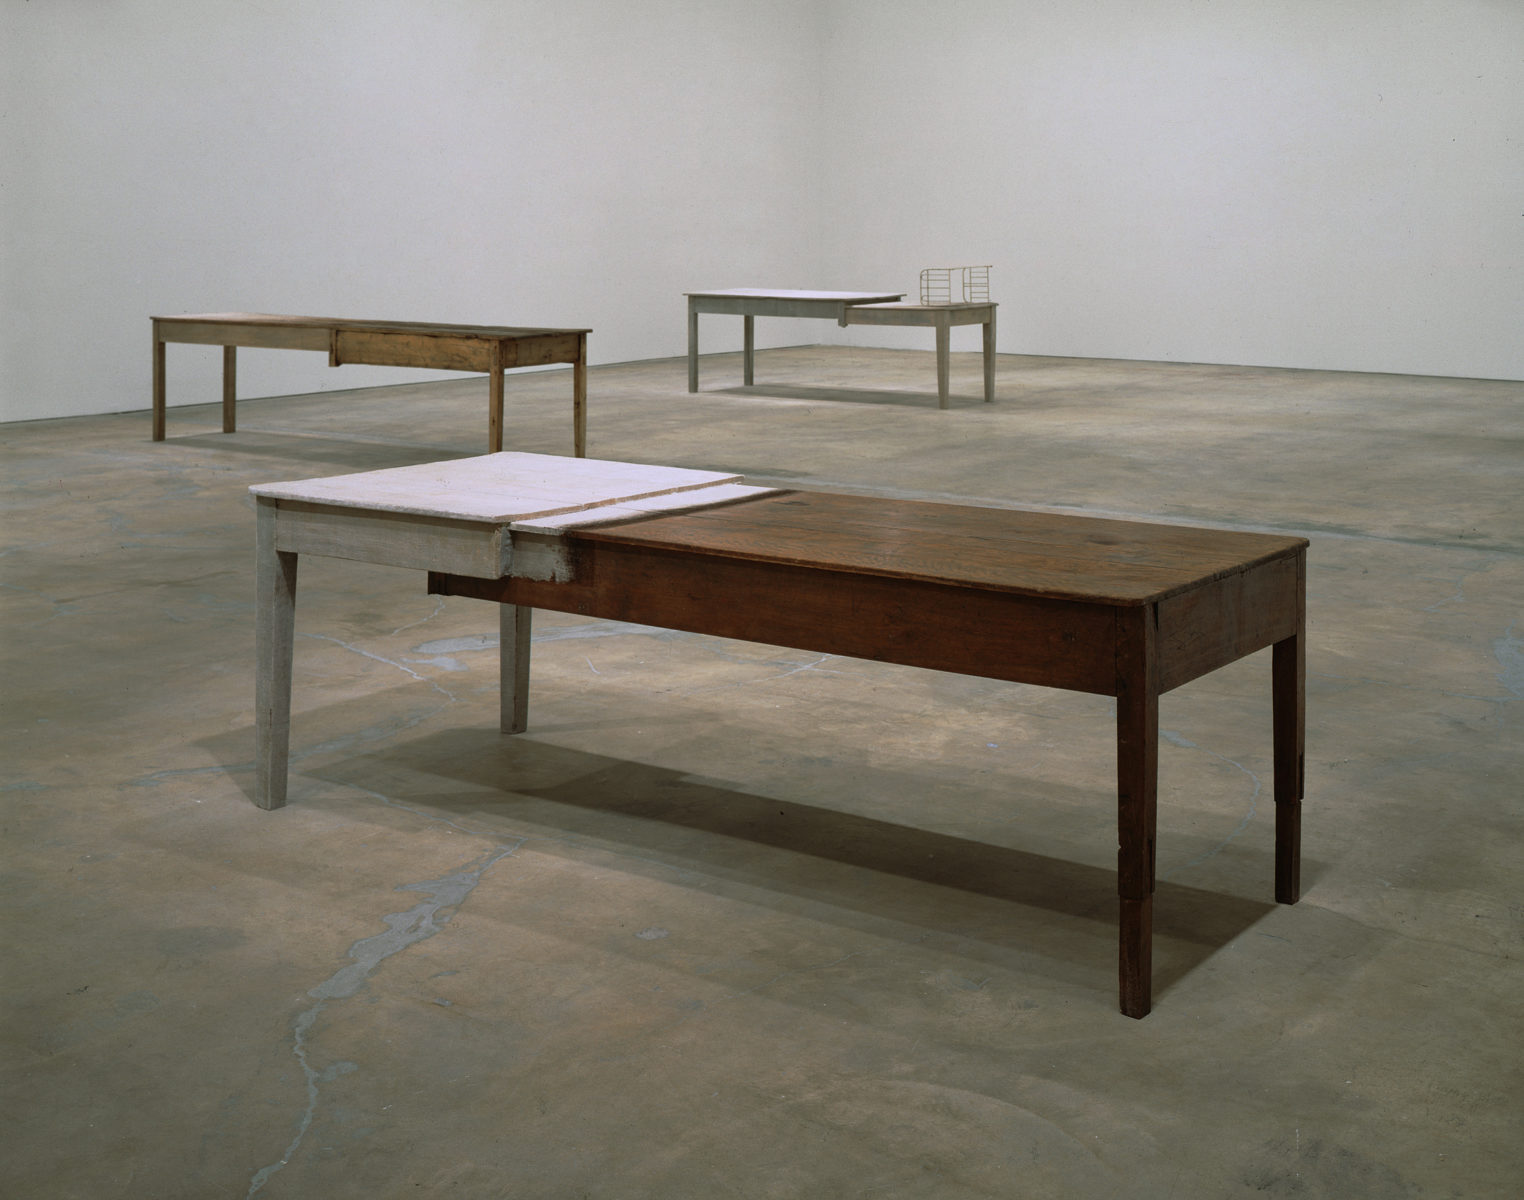 Color photograph of the interior of a vast, spare room with white walls and unfinished concrete floor. Three rectangular tables are placed parallel to each other evenly spread across the expanse of the room. Each table is composed of one half of a white table and one half of a natural wood table, carefully spliced in the middle with the white table overlapping the natural wood table.